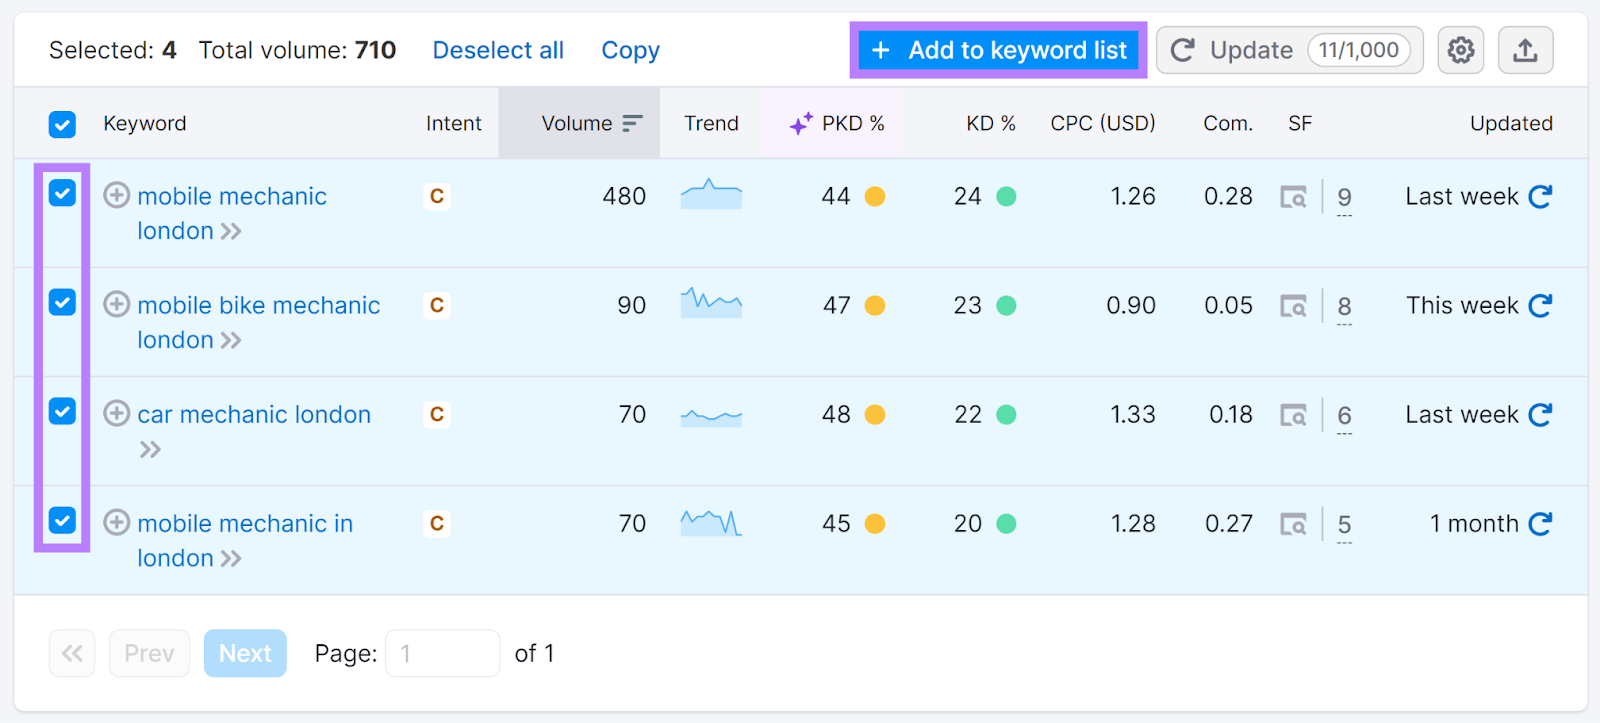 Keywords selected and Add to keyword list button highlighted.